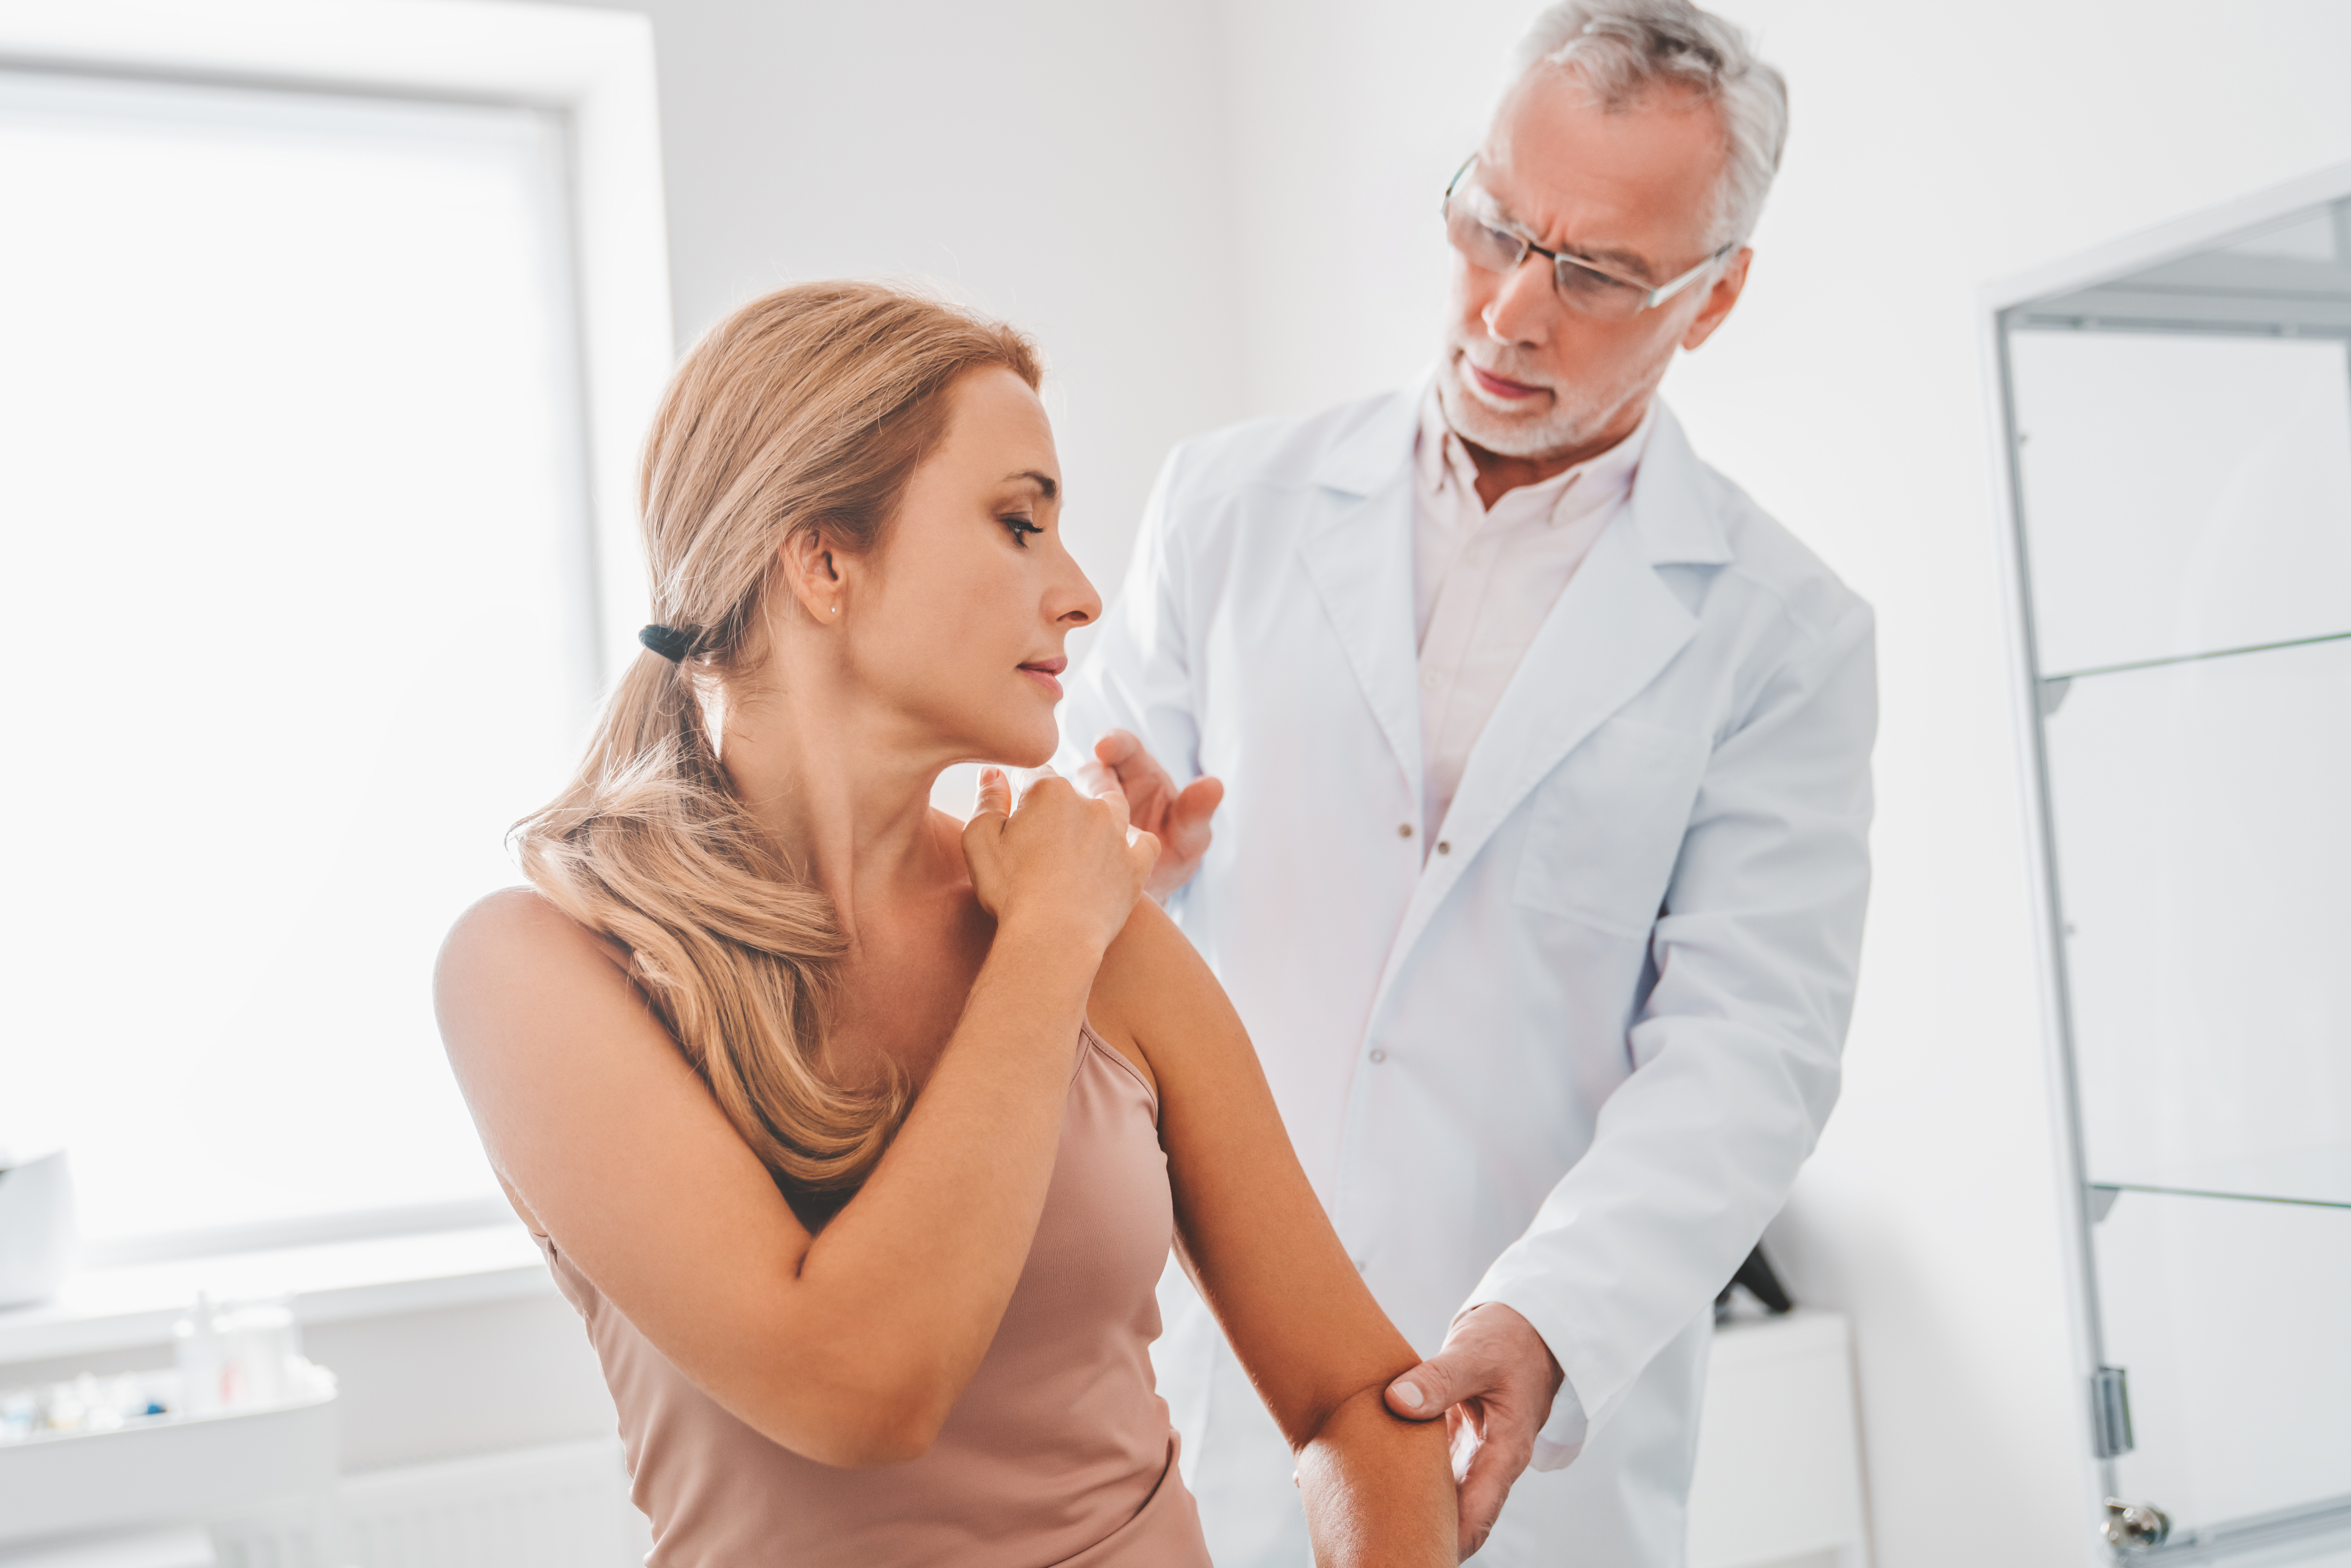 woman getting shoulder checked by doctor